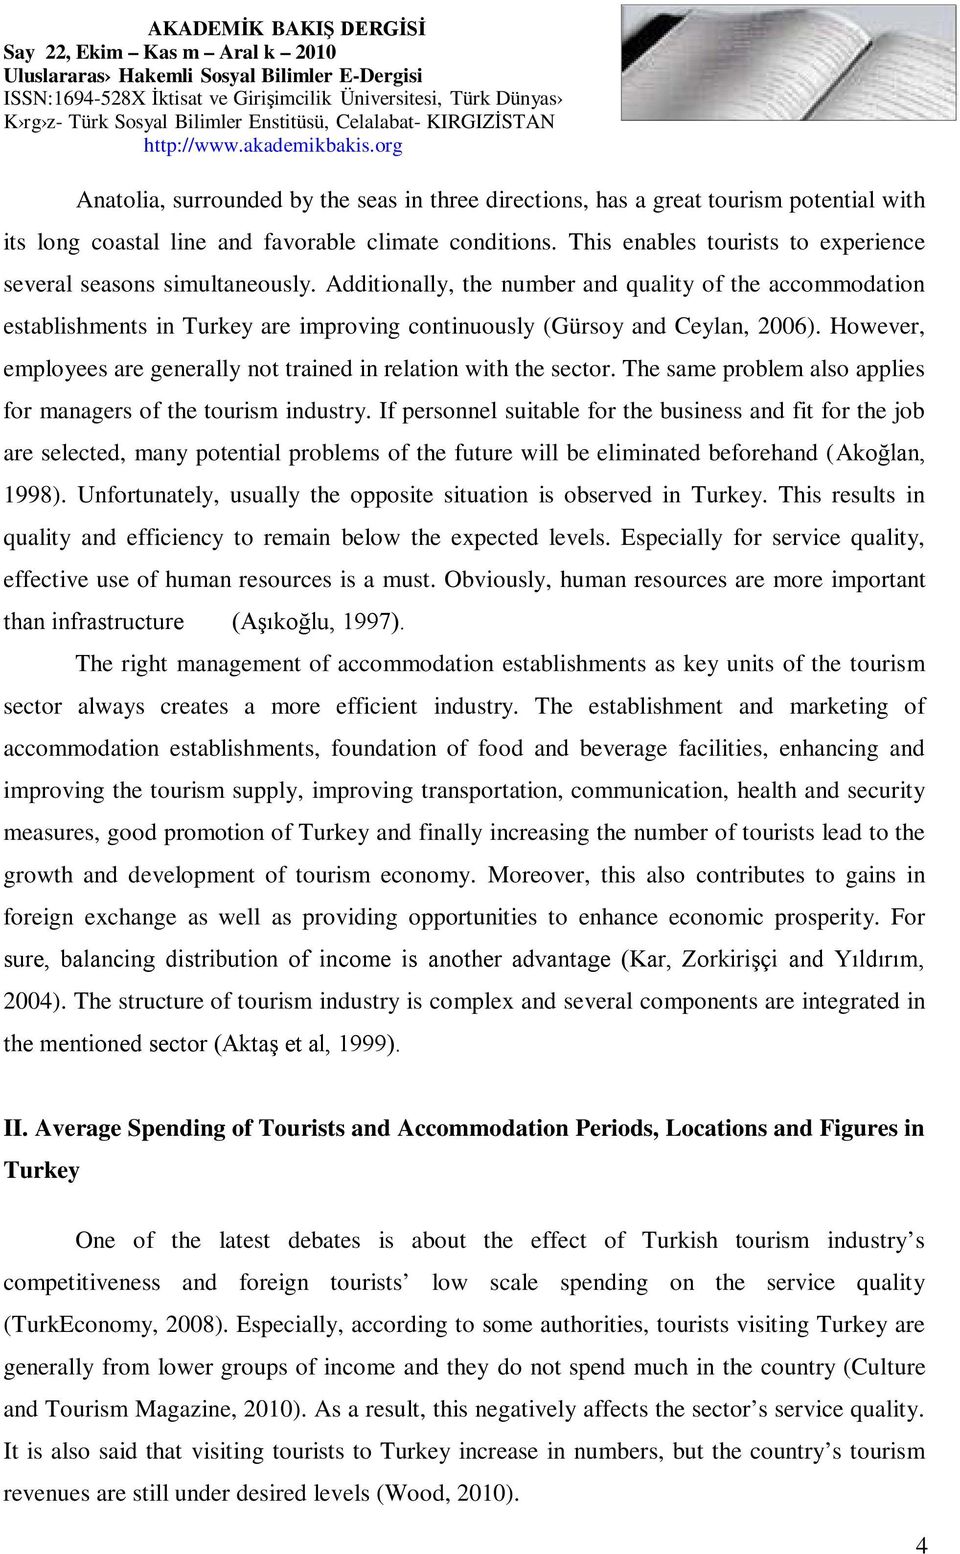 Additionally, the number and quality of the accommodation establishments in Turkey are improving continuously (Gürsoy and Ceylan, 2006).